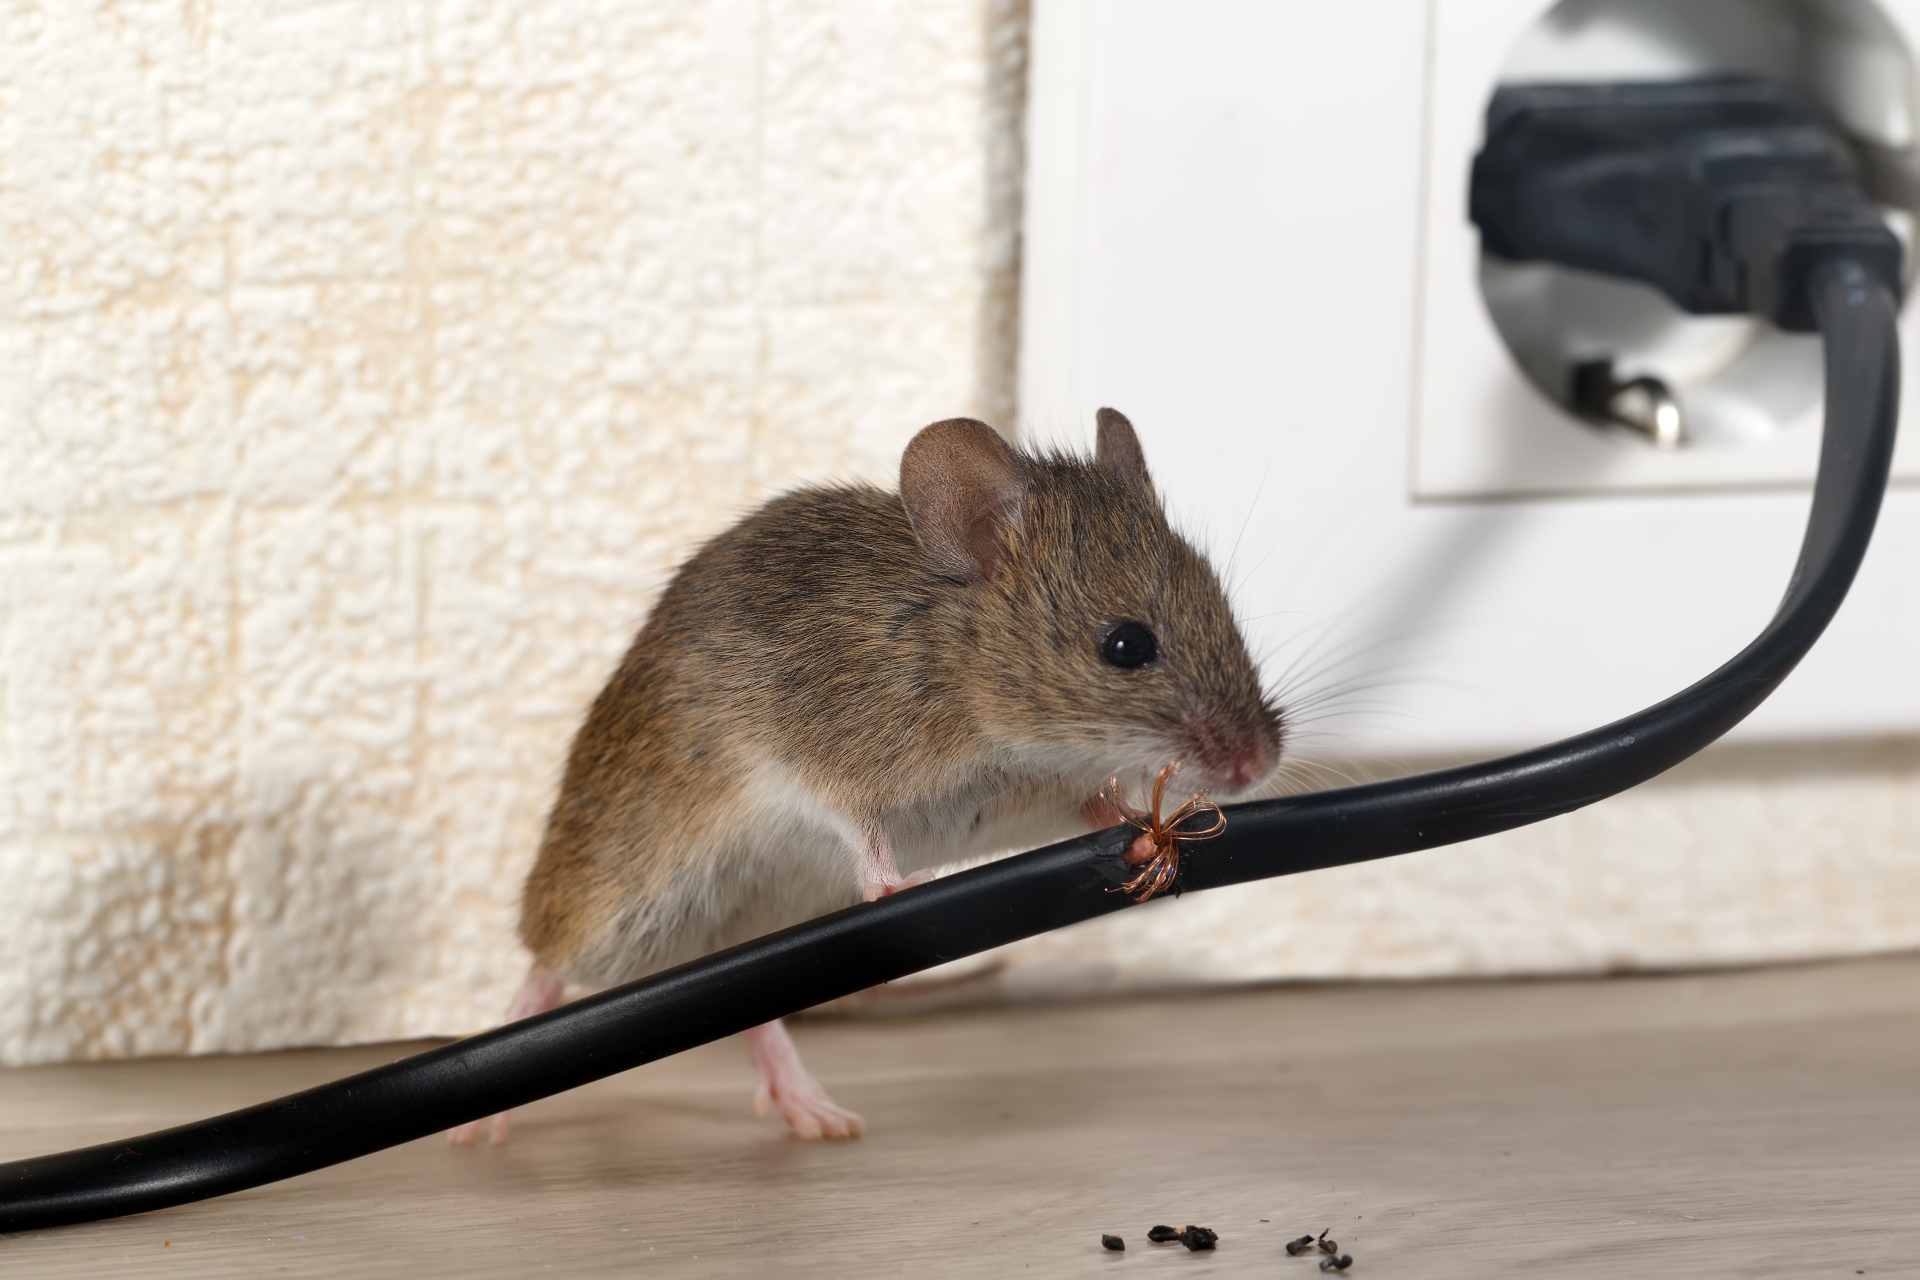 Mice Infestation, Pest Control in Bromley-by-Bow, Bow, E3. Call Now 020 8166 9746